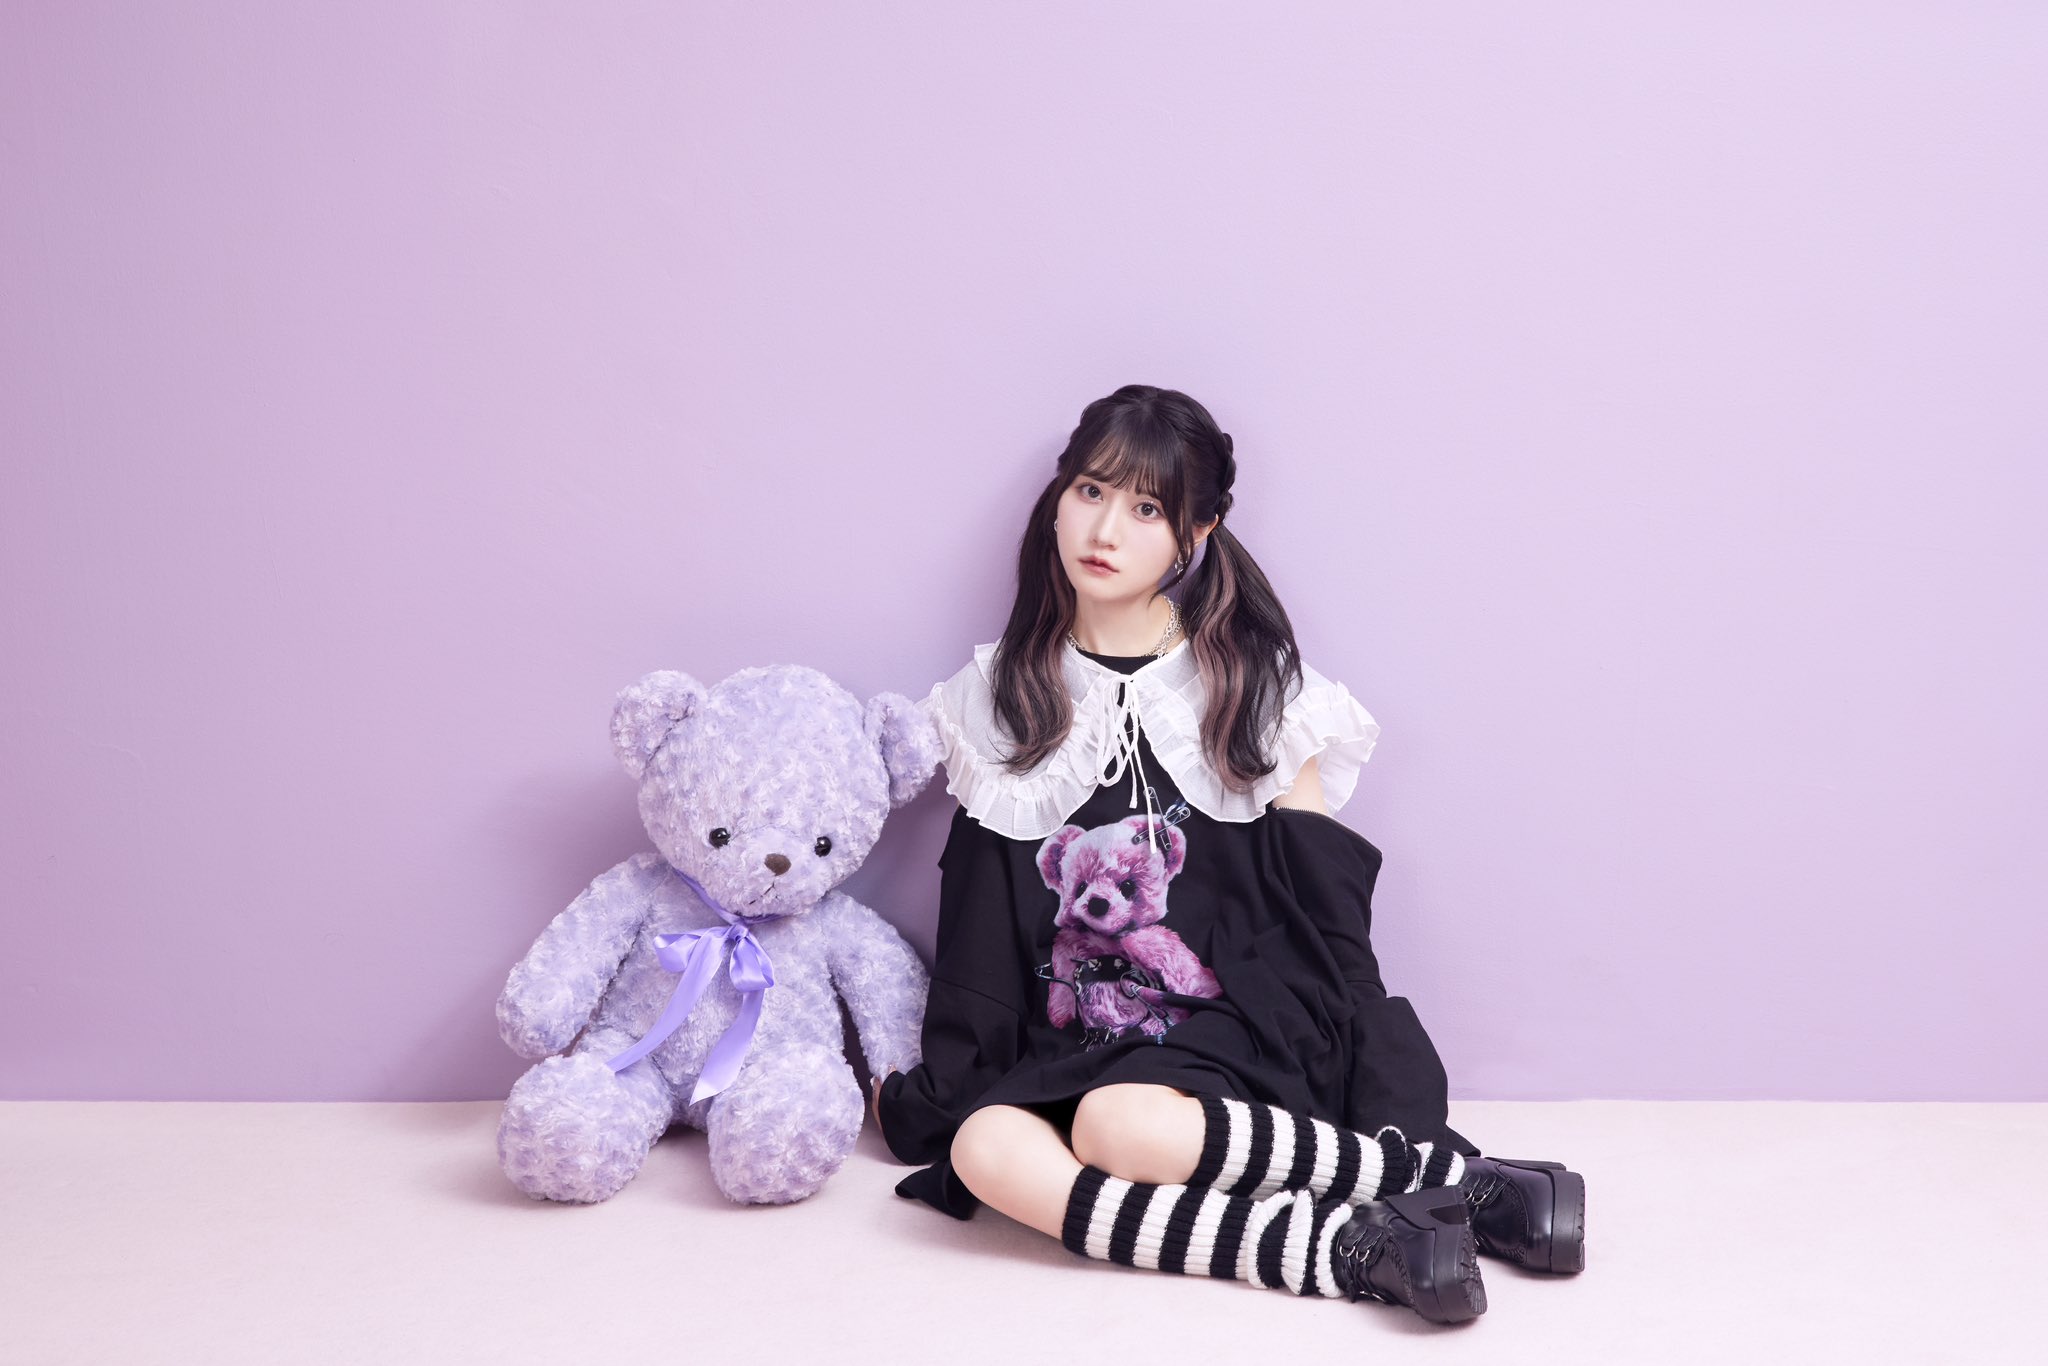 Yui Ogura Profile and Facts (Updated!) - Kpop Profiles